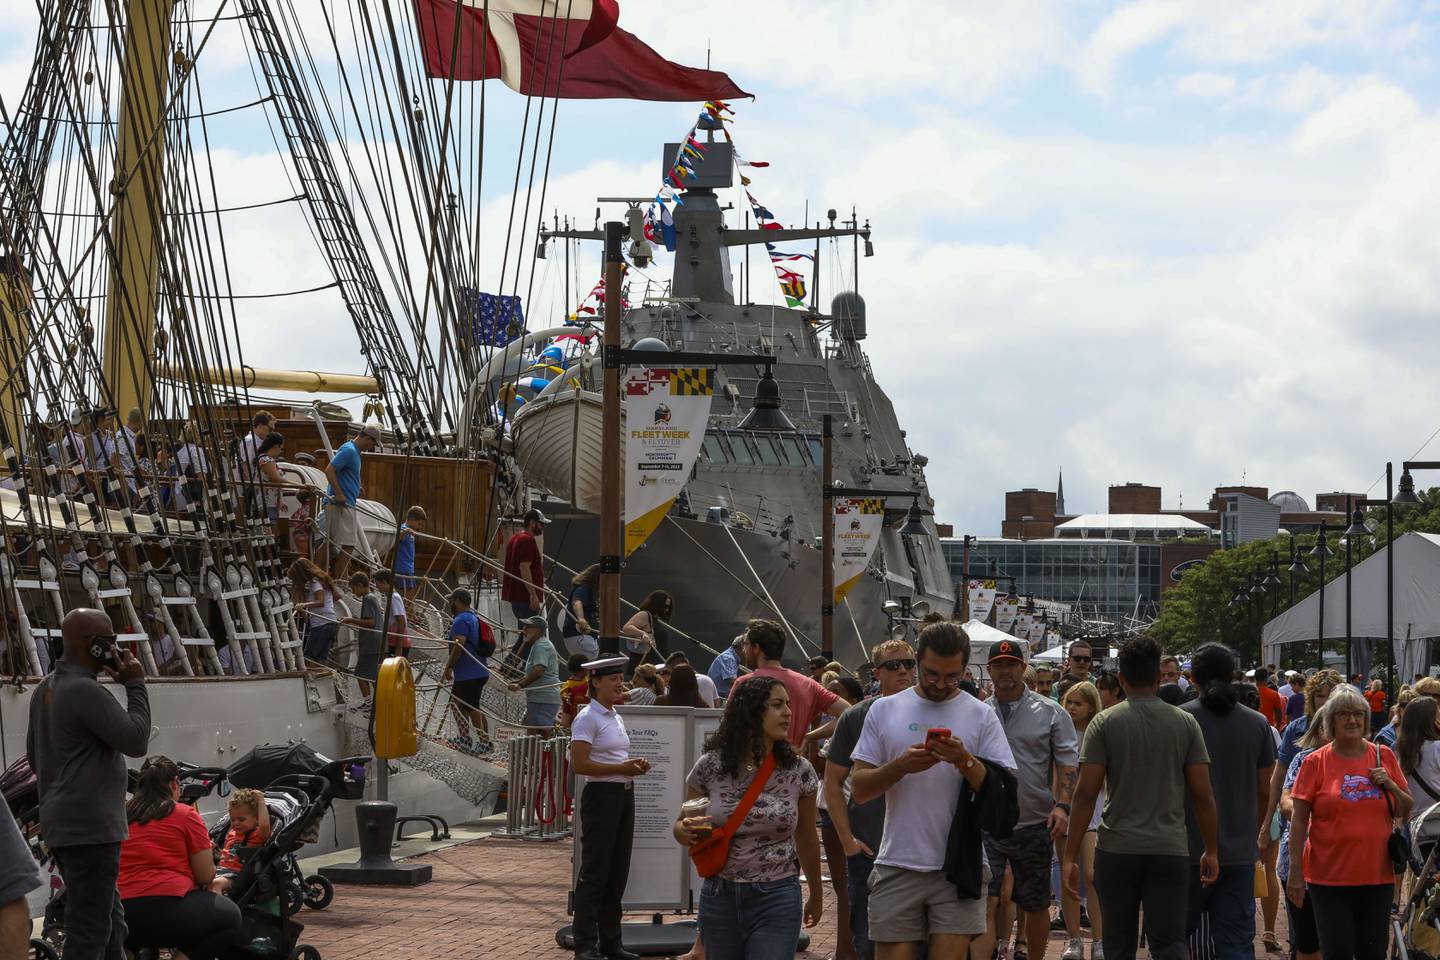 Baltimore’s Fleet Week is a part of a United States Navy, United States Marine Corps, and United States Coast Guard tradition in where active military ships recently deployed in overseas operations dock in several major cities for one week.